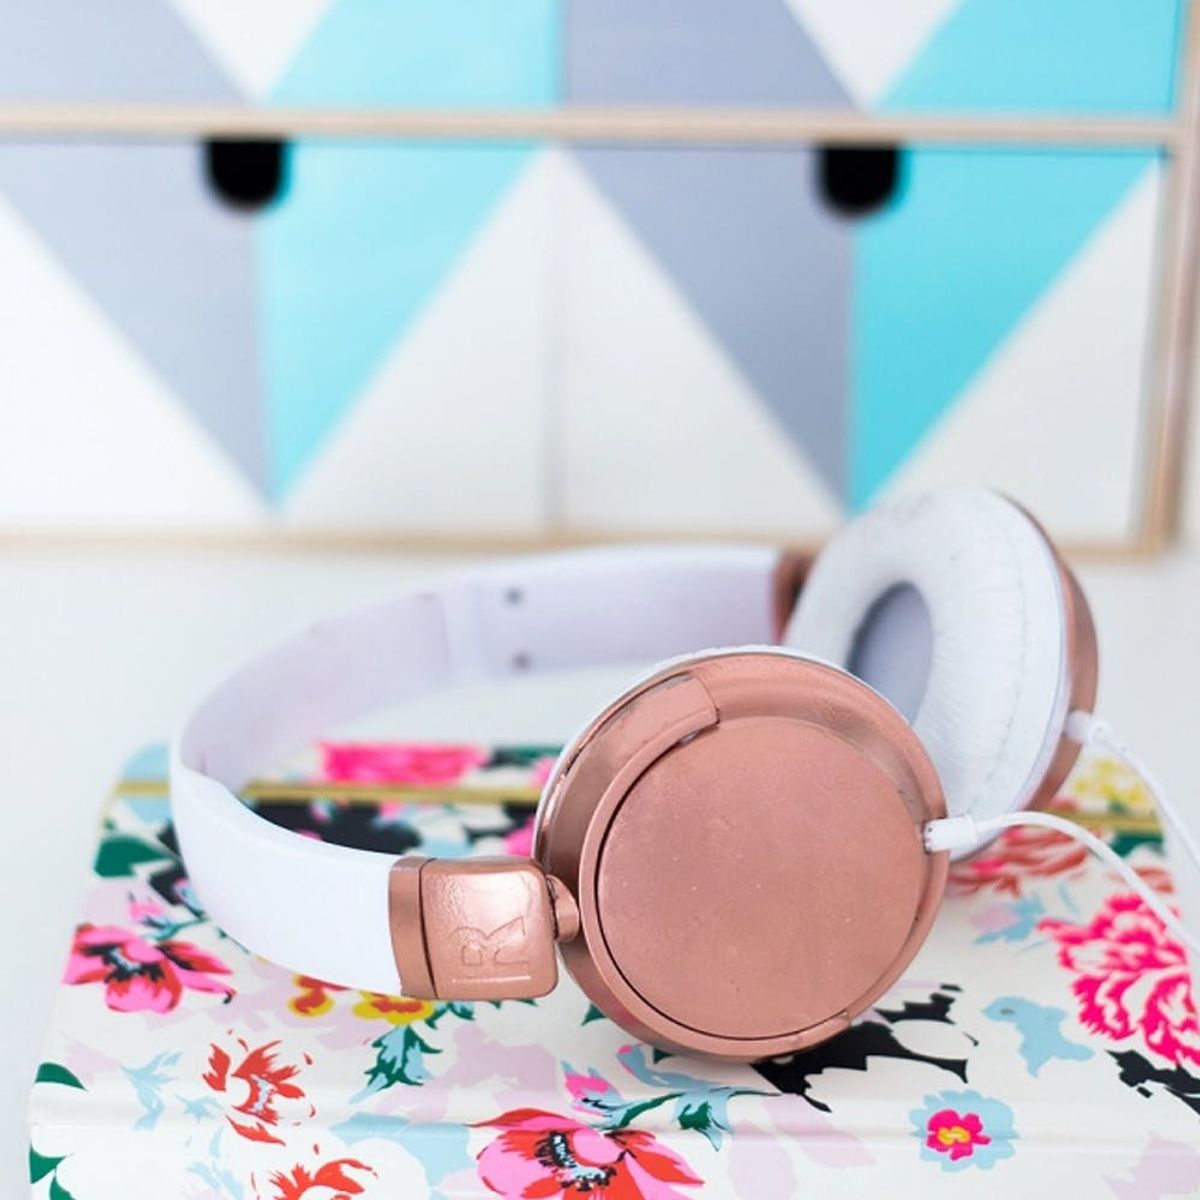 DIY These ModCloth-Inspired Headphones in Minutes